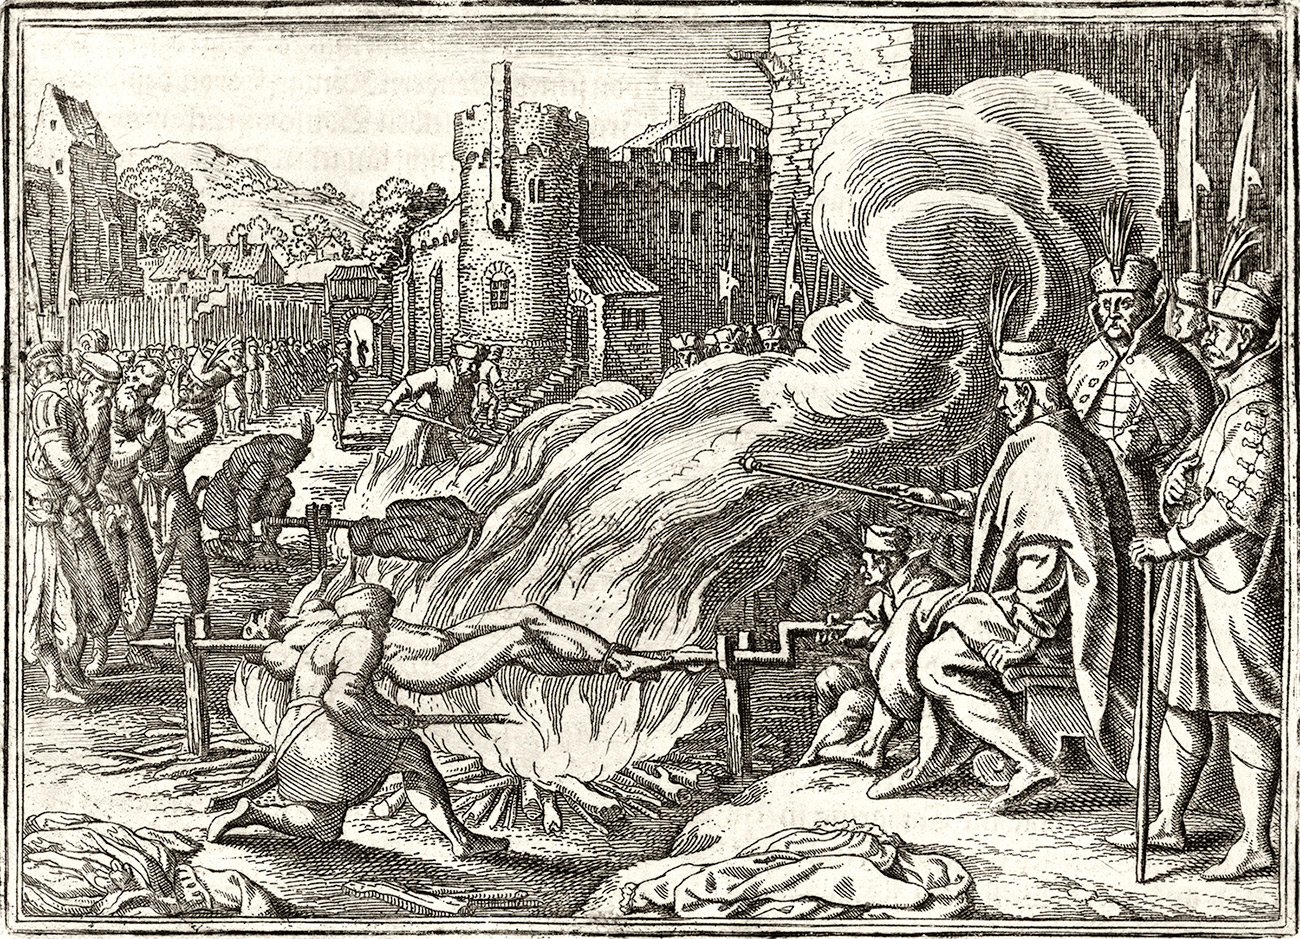 Ivan the Terrible roasts Johann Boy, governor of Livonia, on a spit, 1573. Engraving, c. 1630. AKG Images